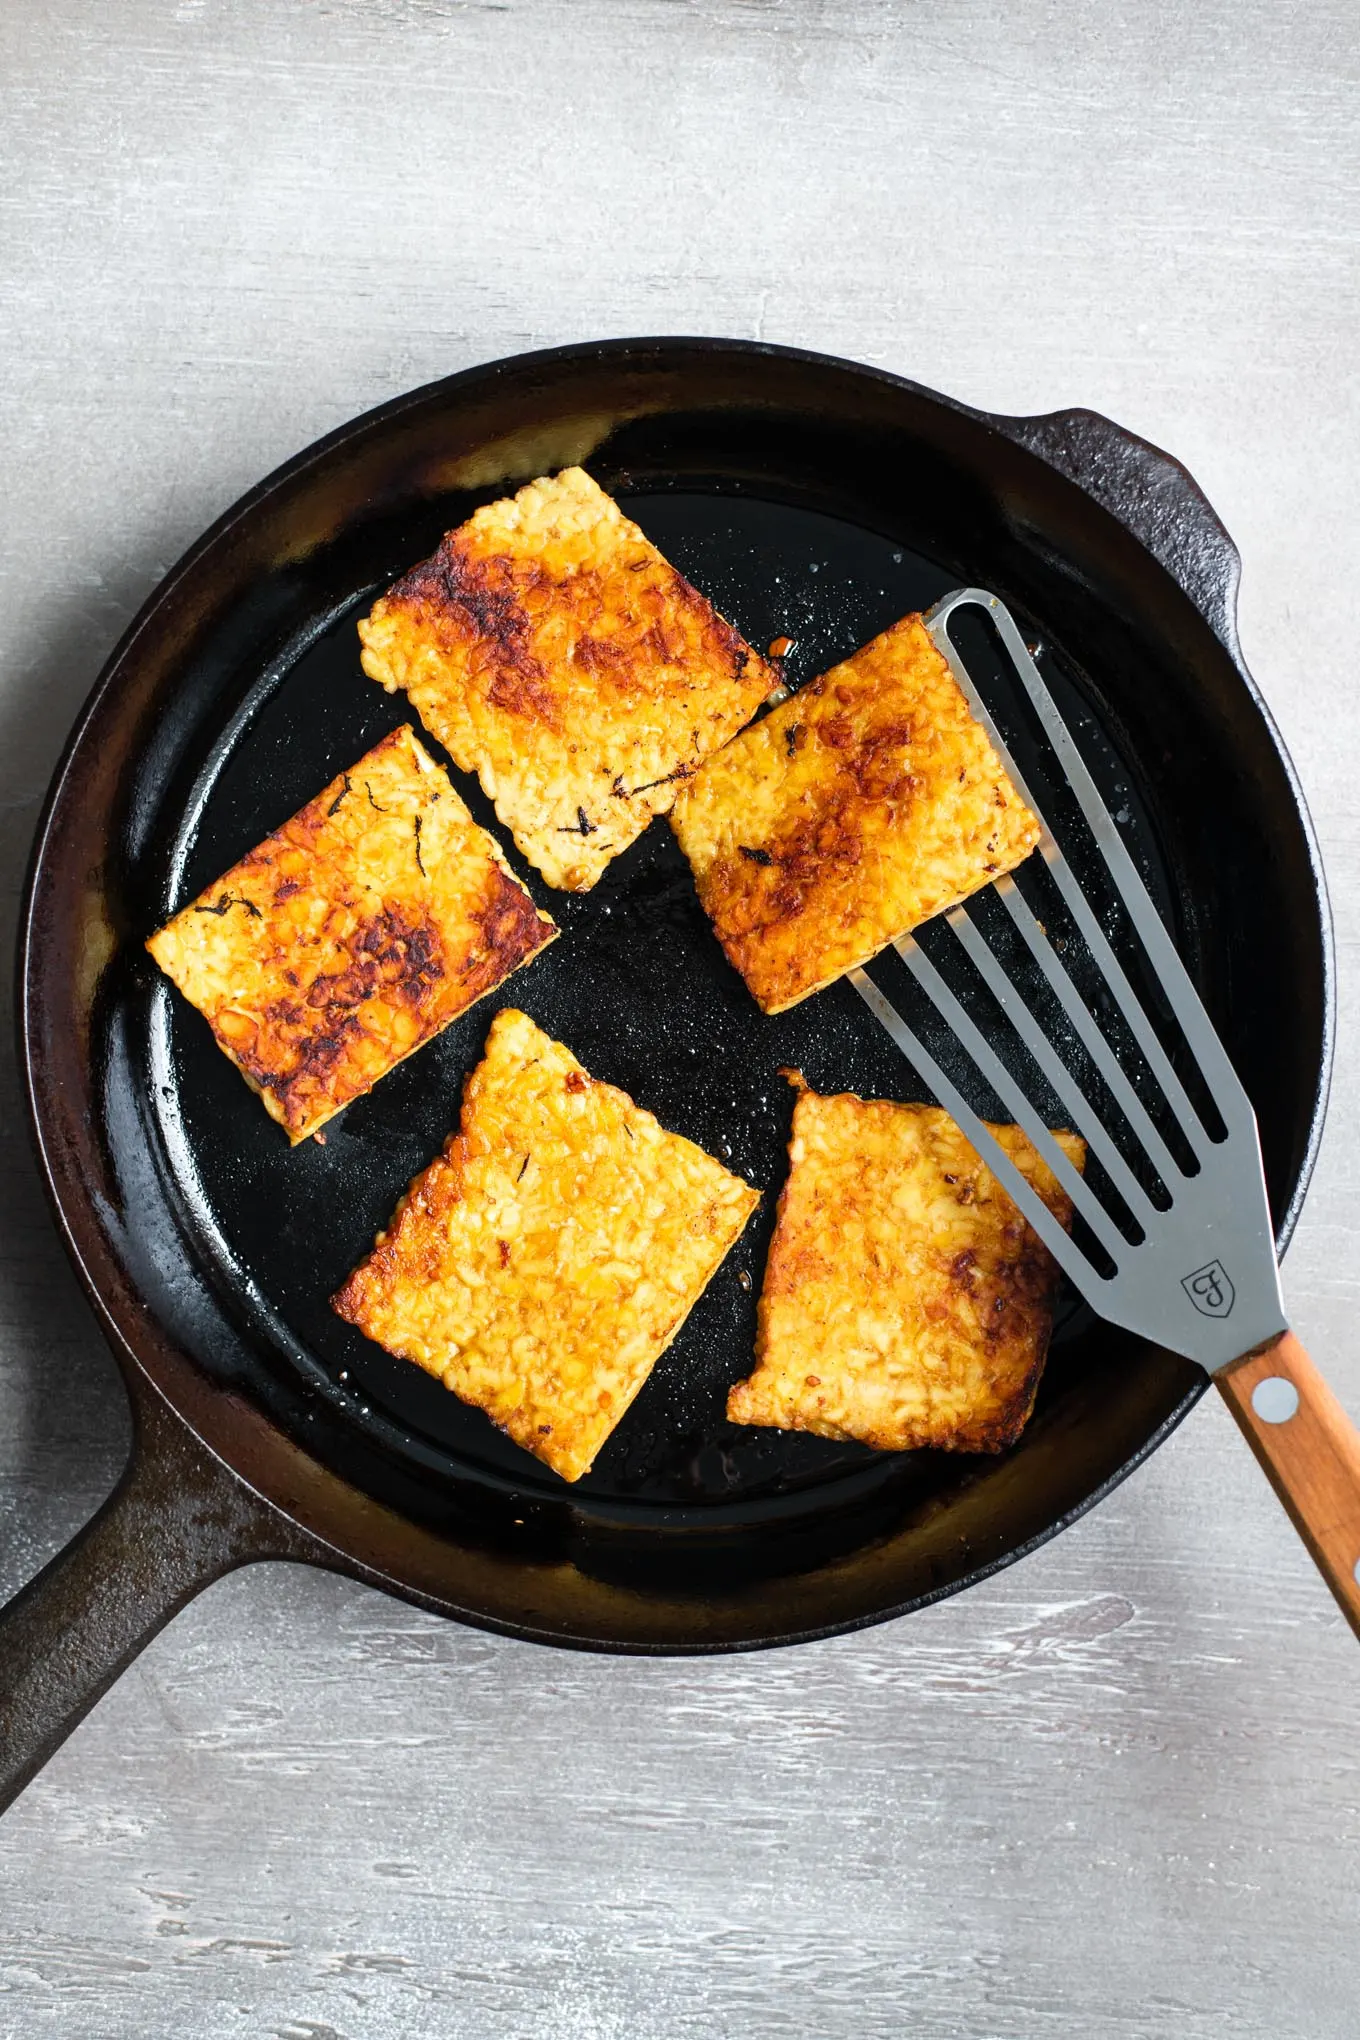 marinated corned tempeh in the skillet and browned